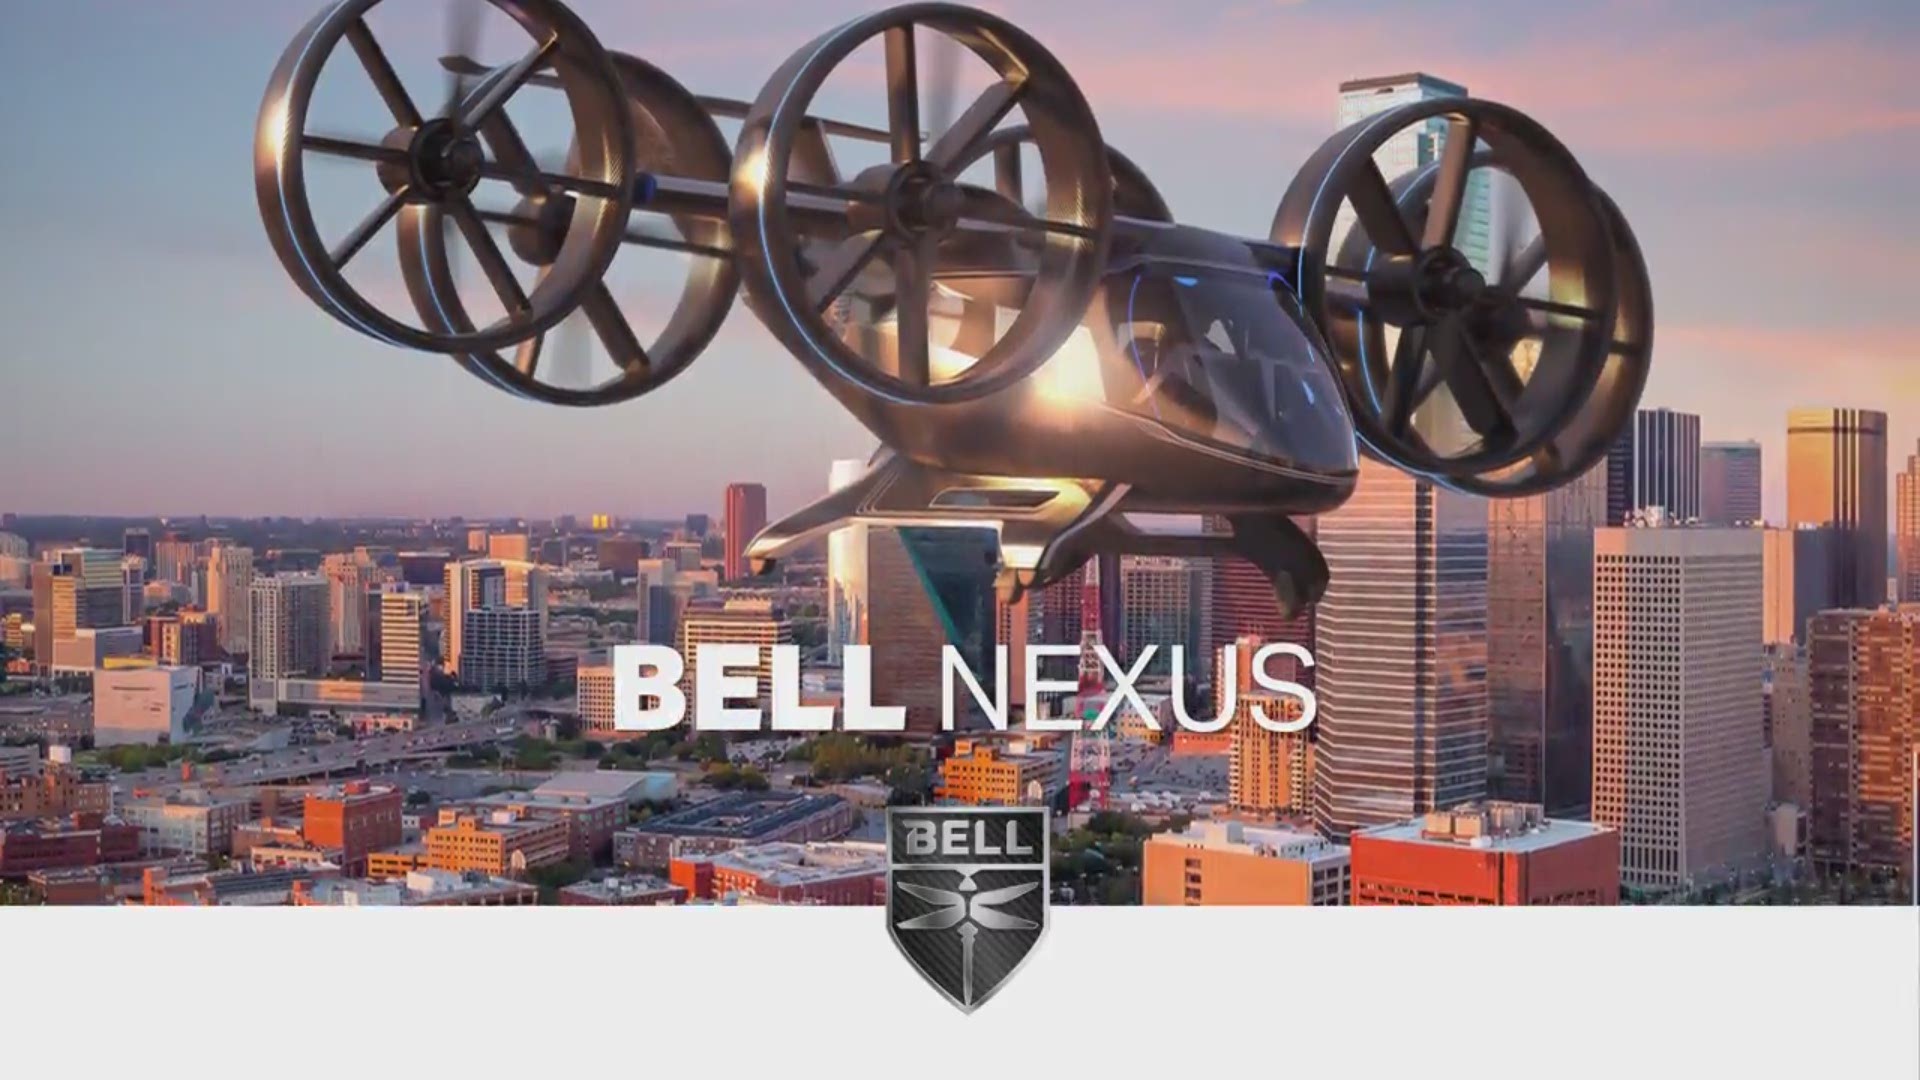 Bell hopes to have the air taxis zipping around Dallas and other cities by the mid-2020s. (Video courtesy of Bell Helicopter)